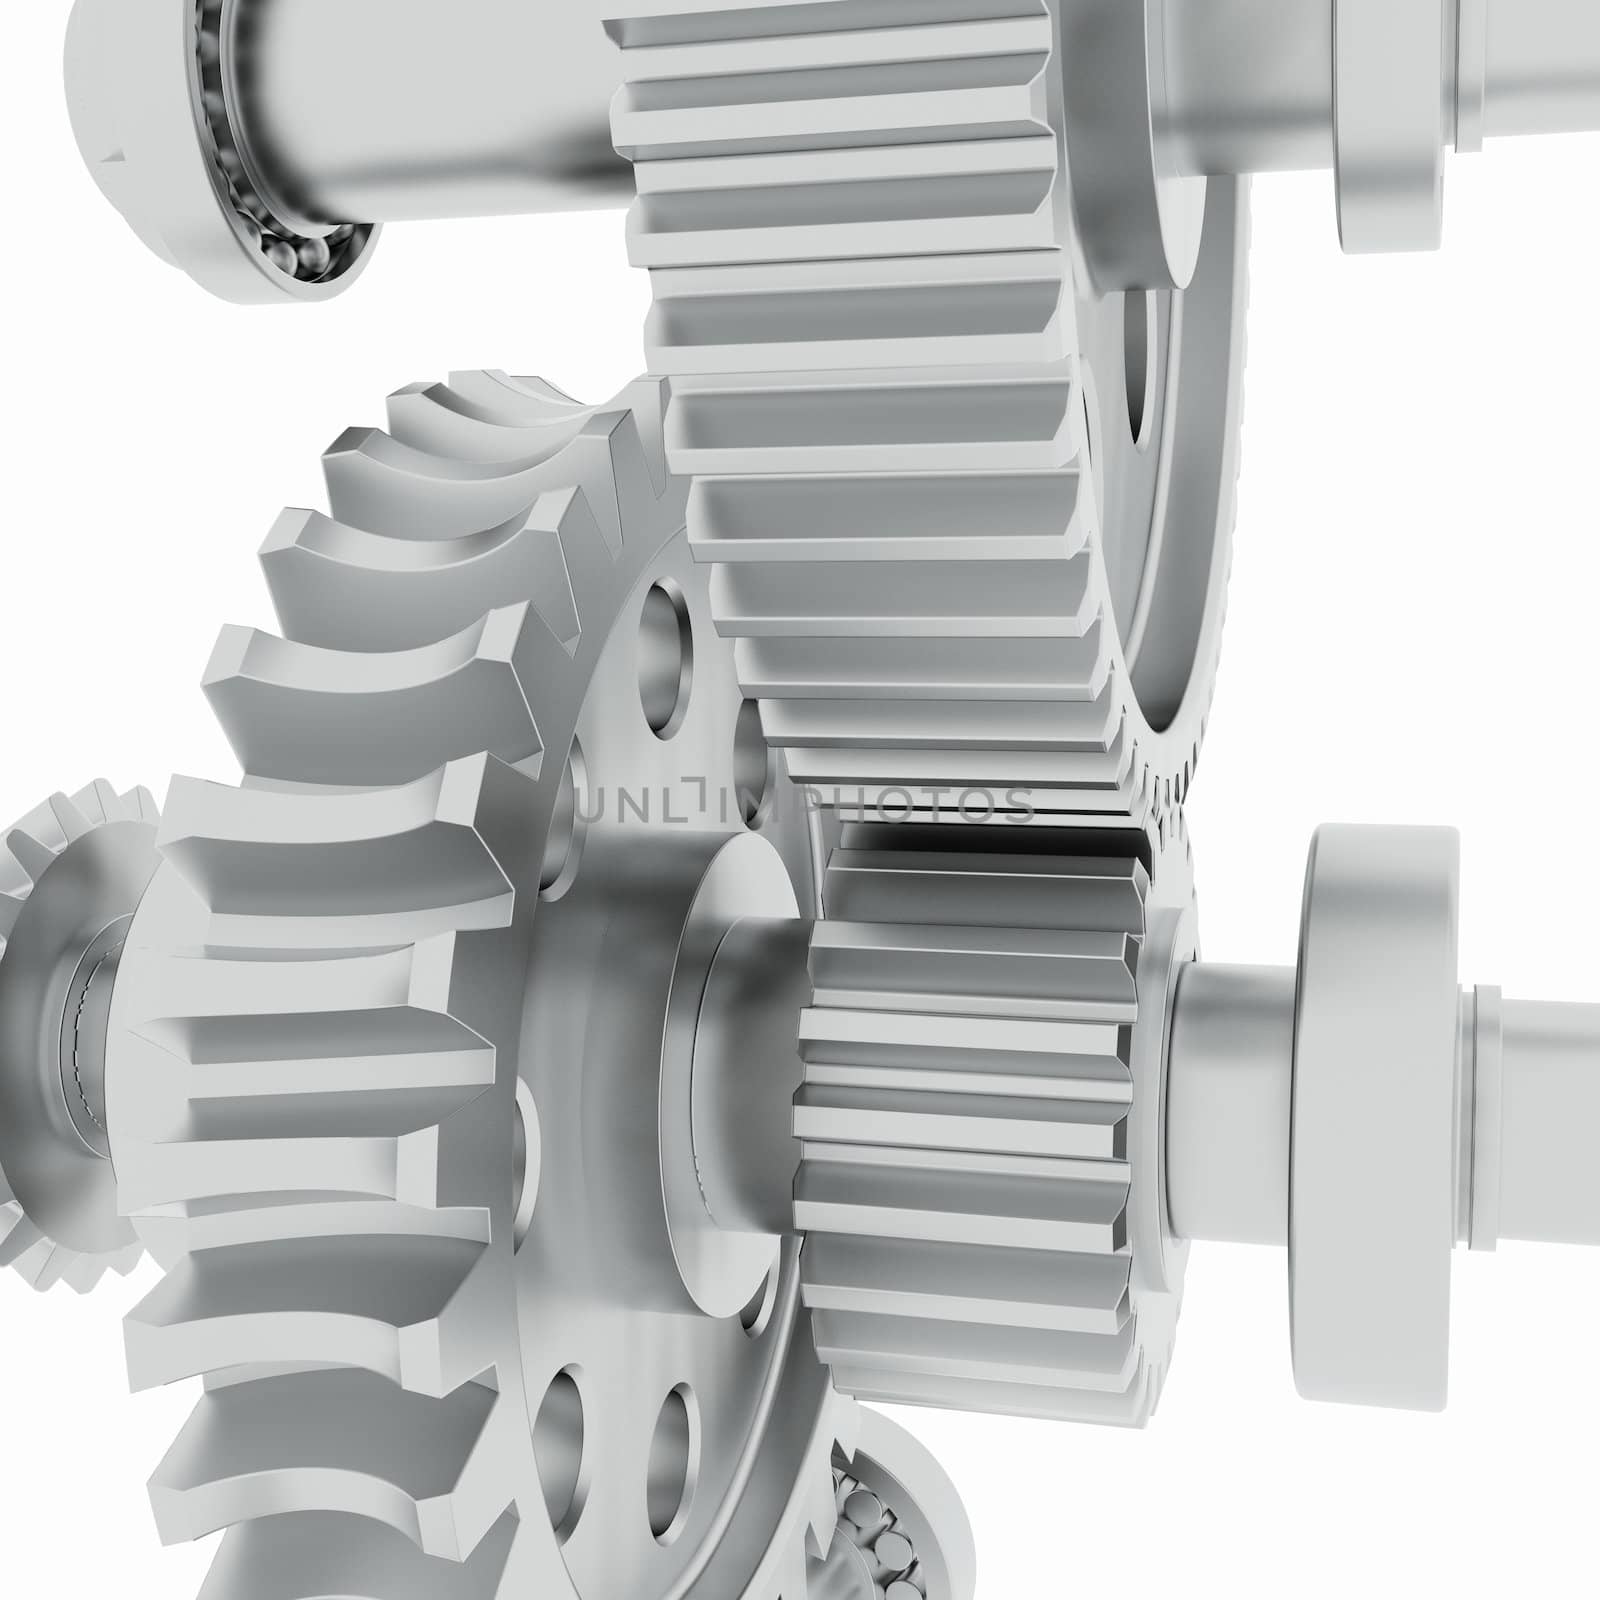 Metal shafts, gears and bearings. 3d render on white background